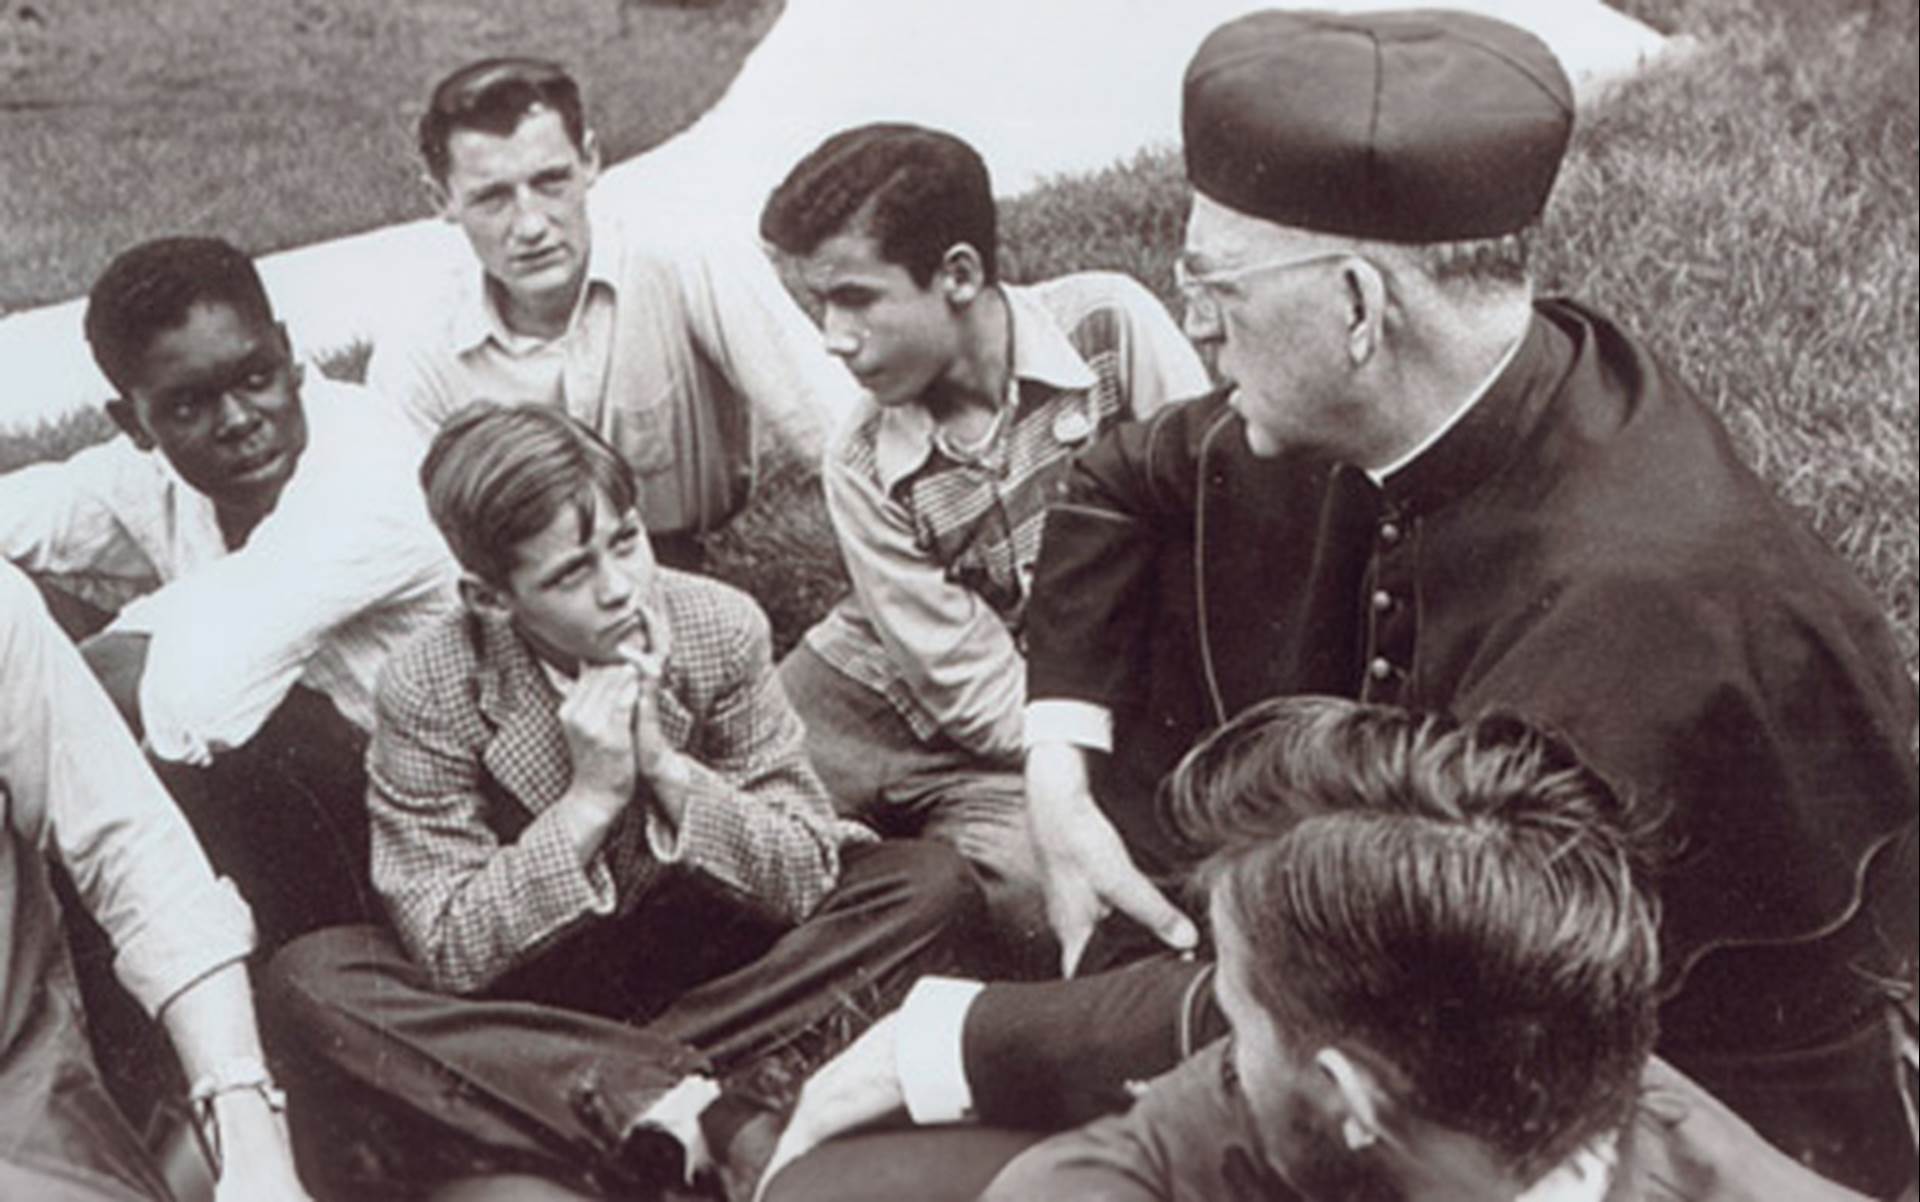 Father Flanagan with kids from Boys Town